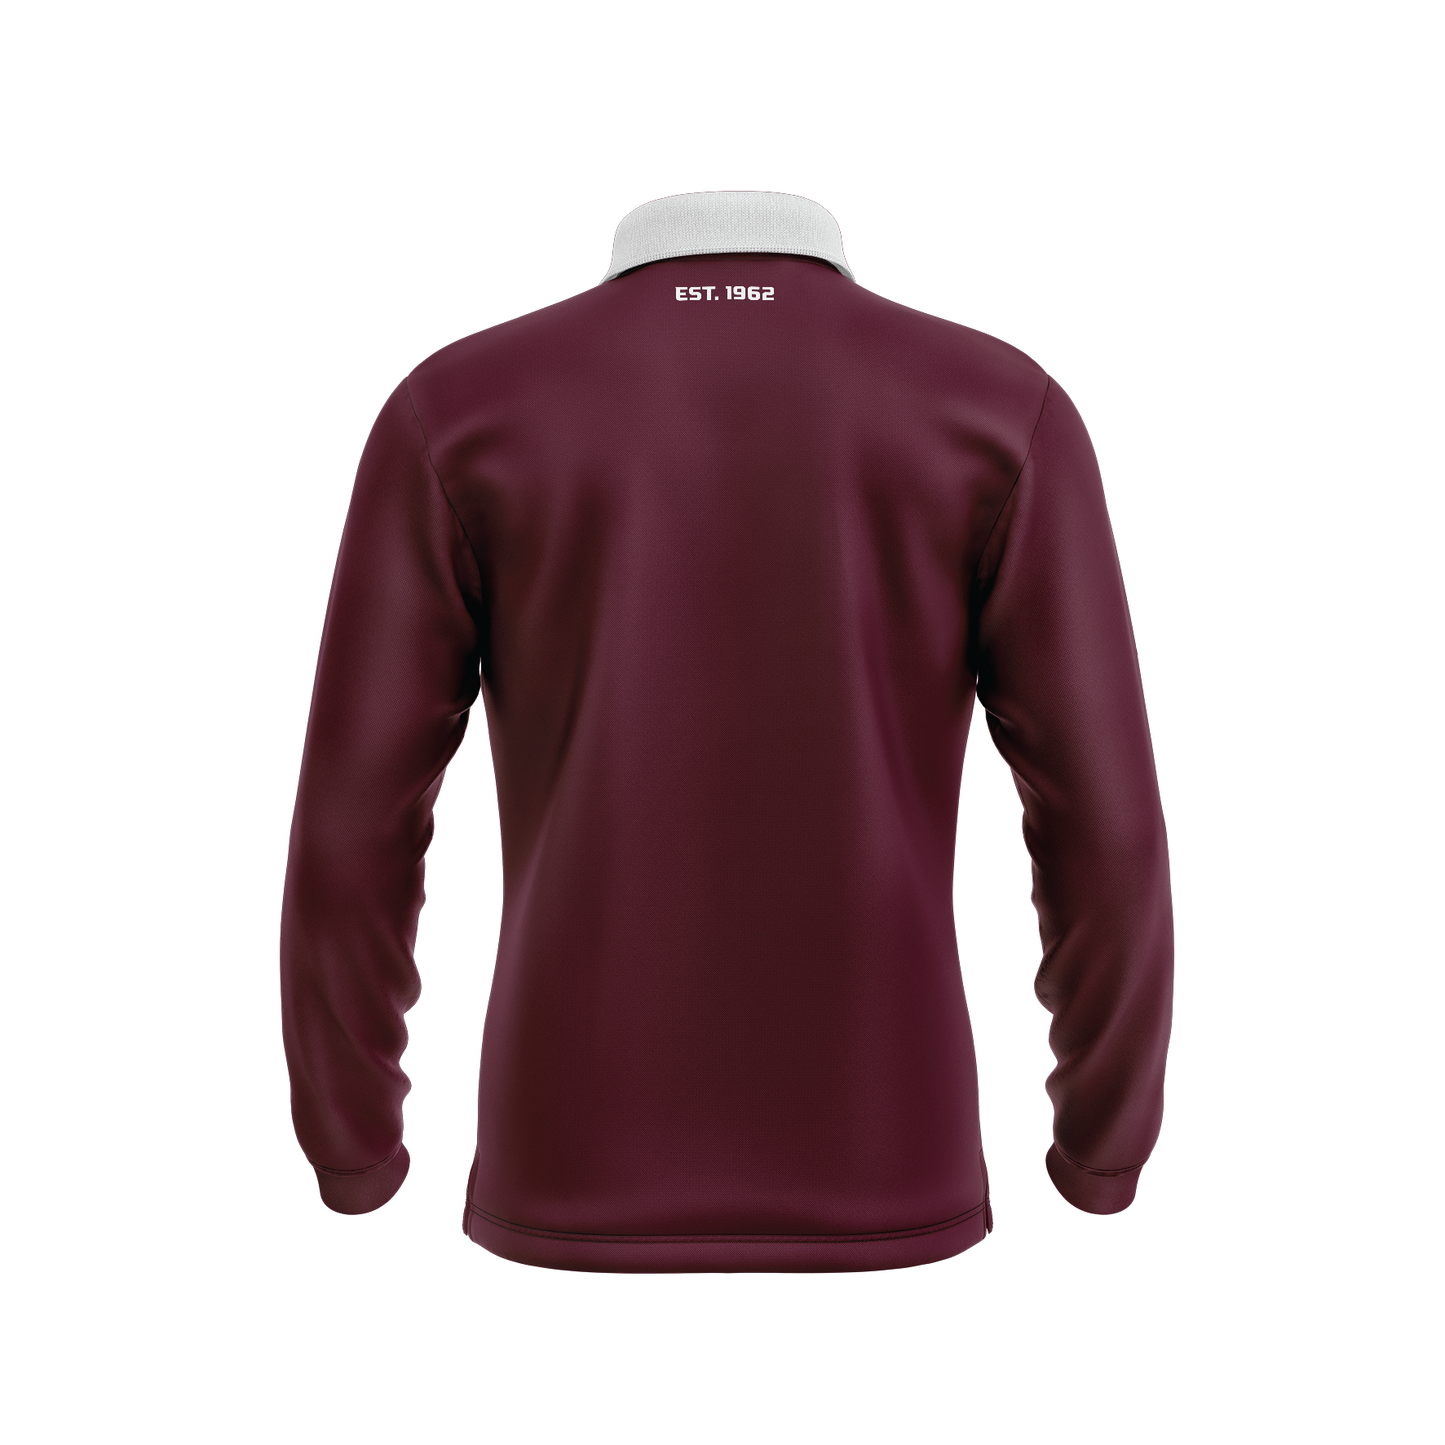 EDSC RUGBY TOP (PRE ORDER NOW)